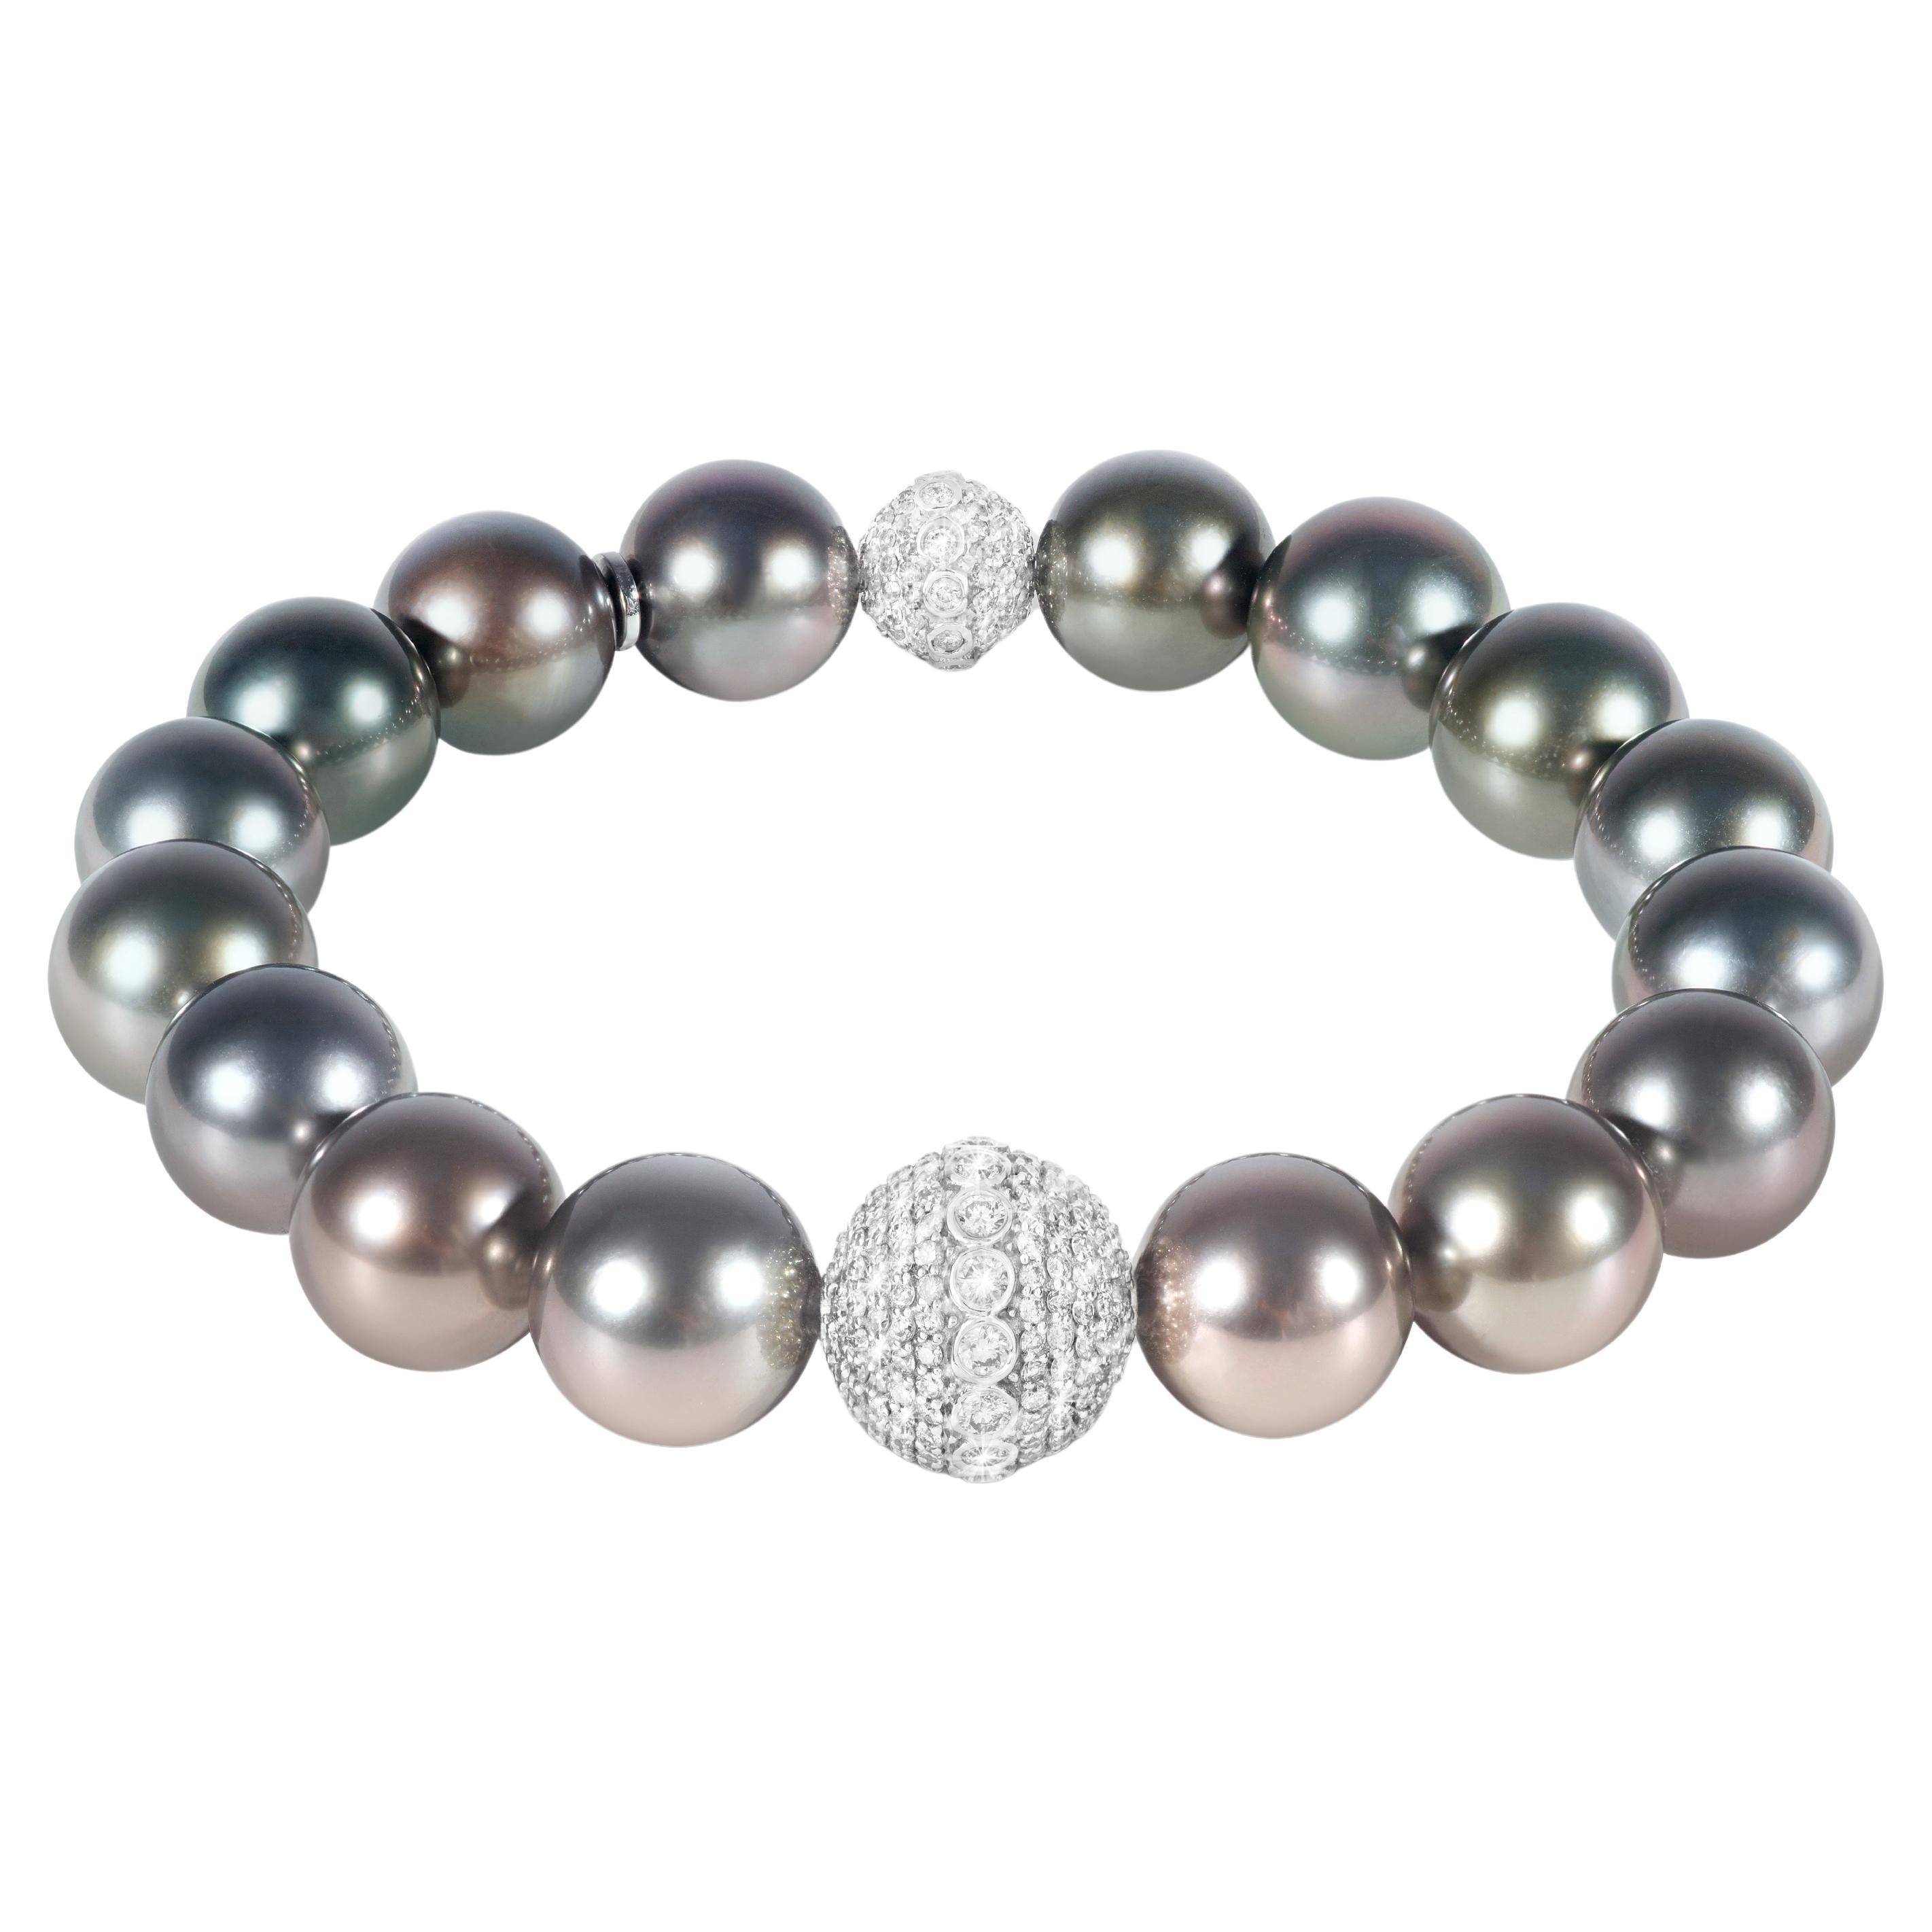 Tahiti Pearl Bracelet with 18k White Gold Diamond Encrusted Orbs For Sale